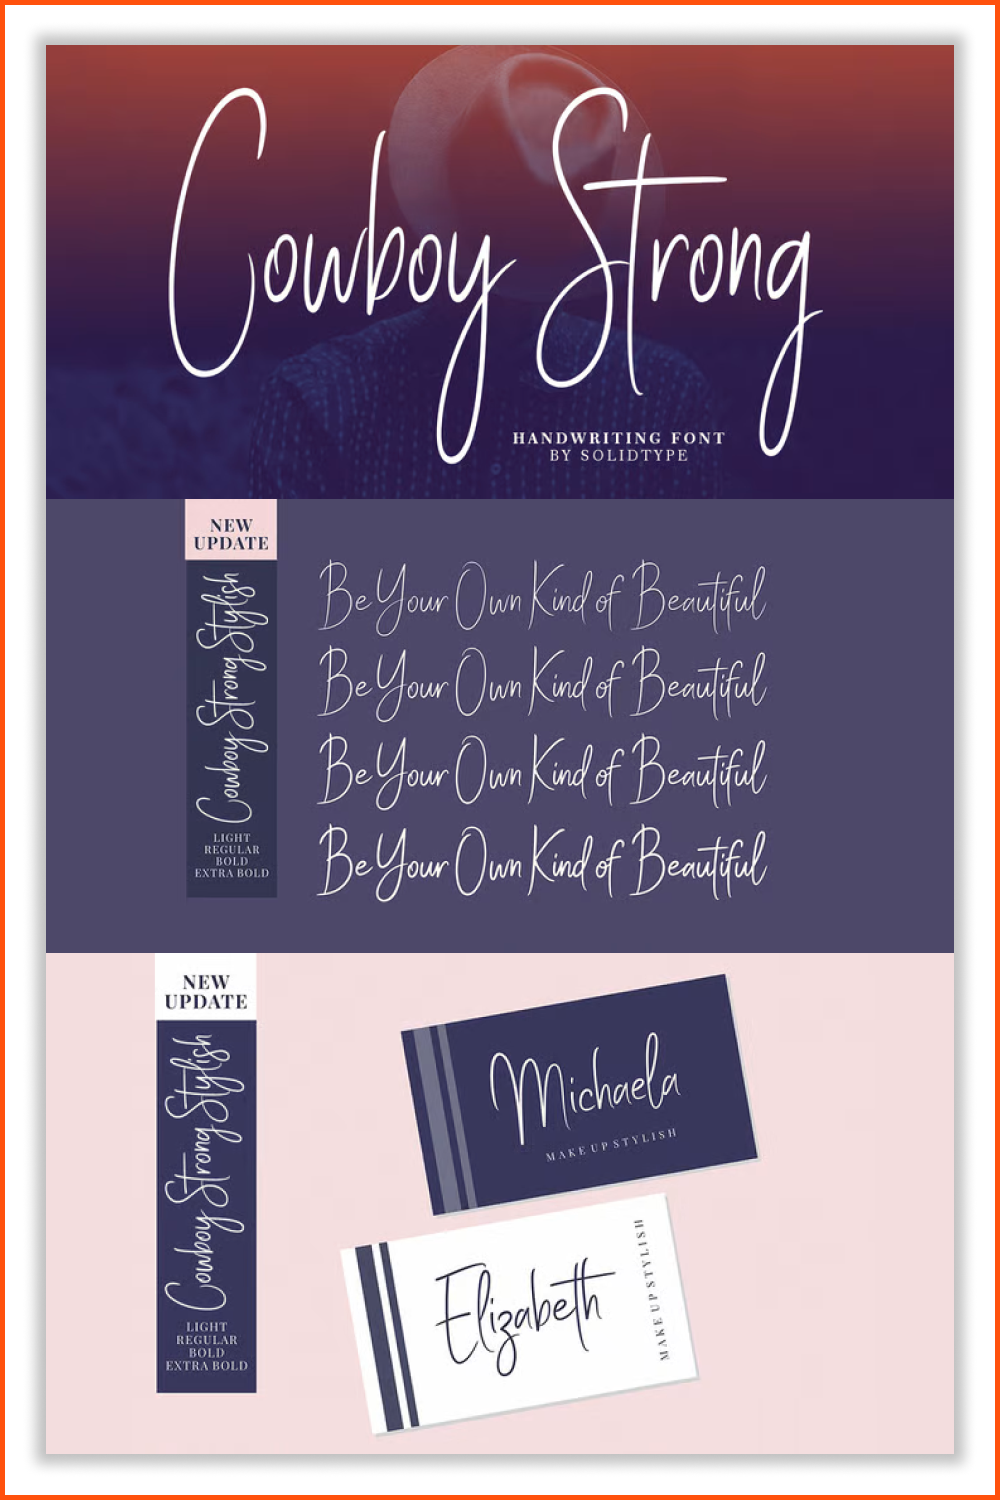 Text written in type Cowboy Strong on a purple background and on business cards.